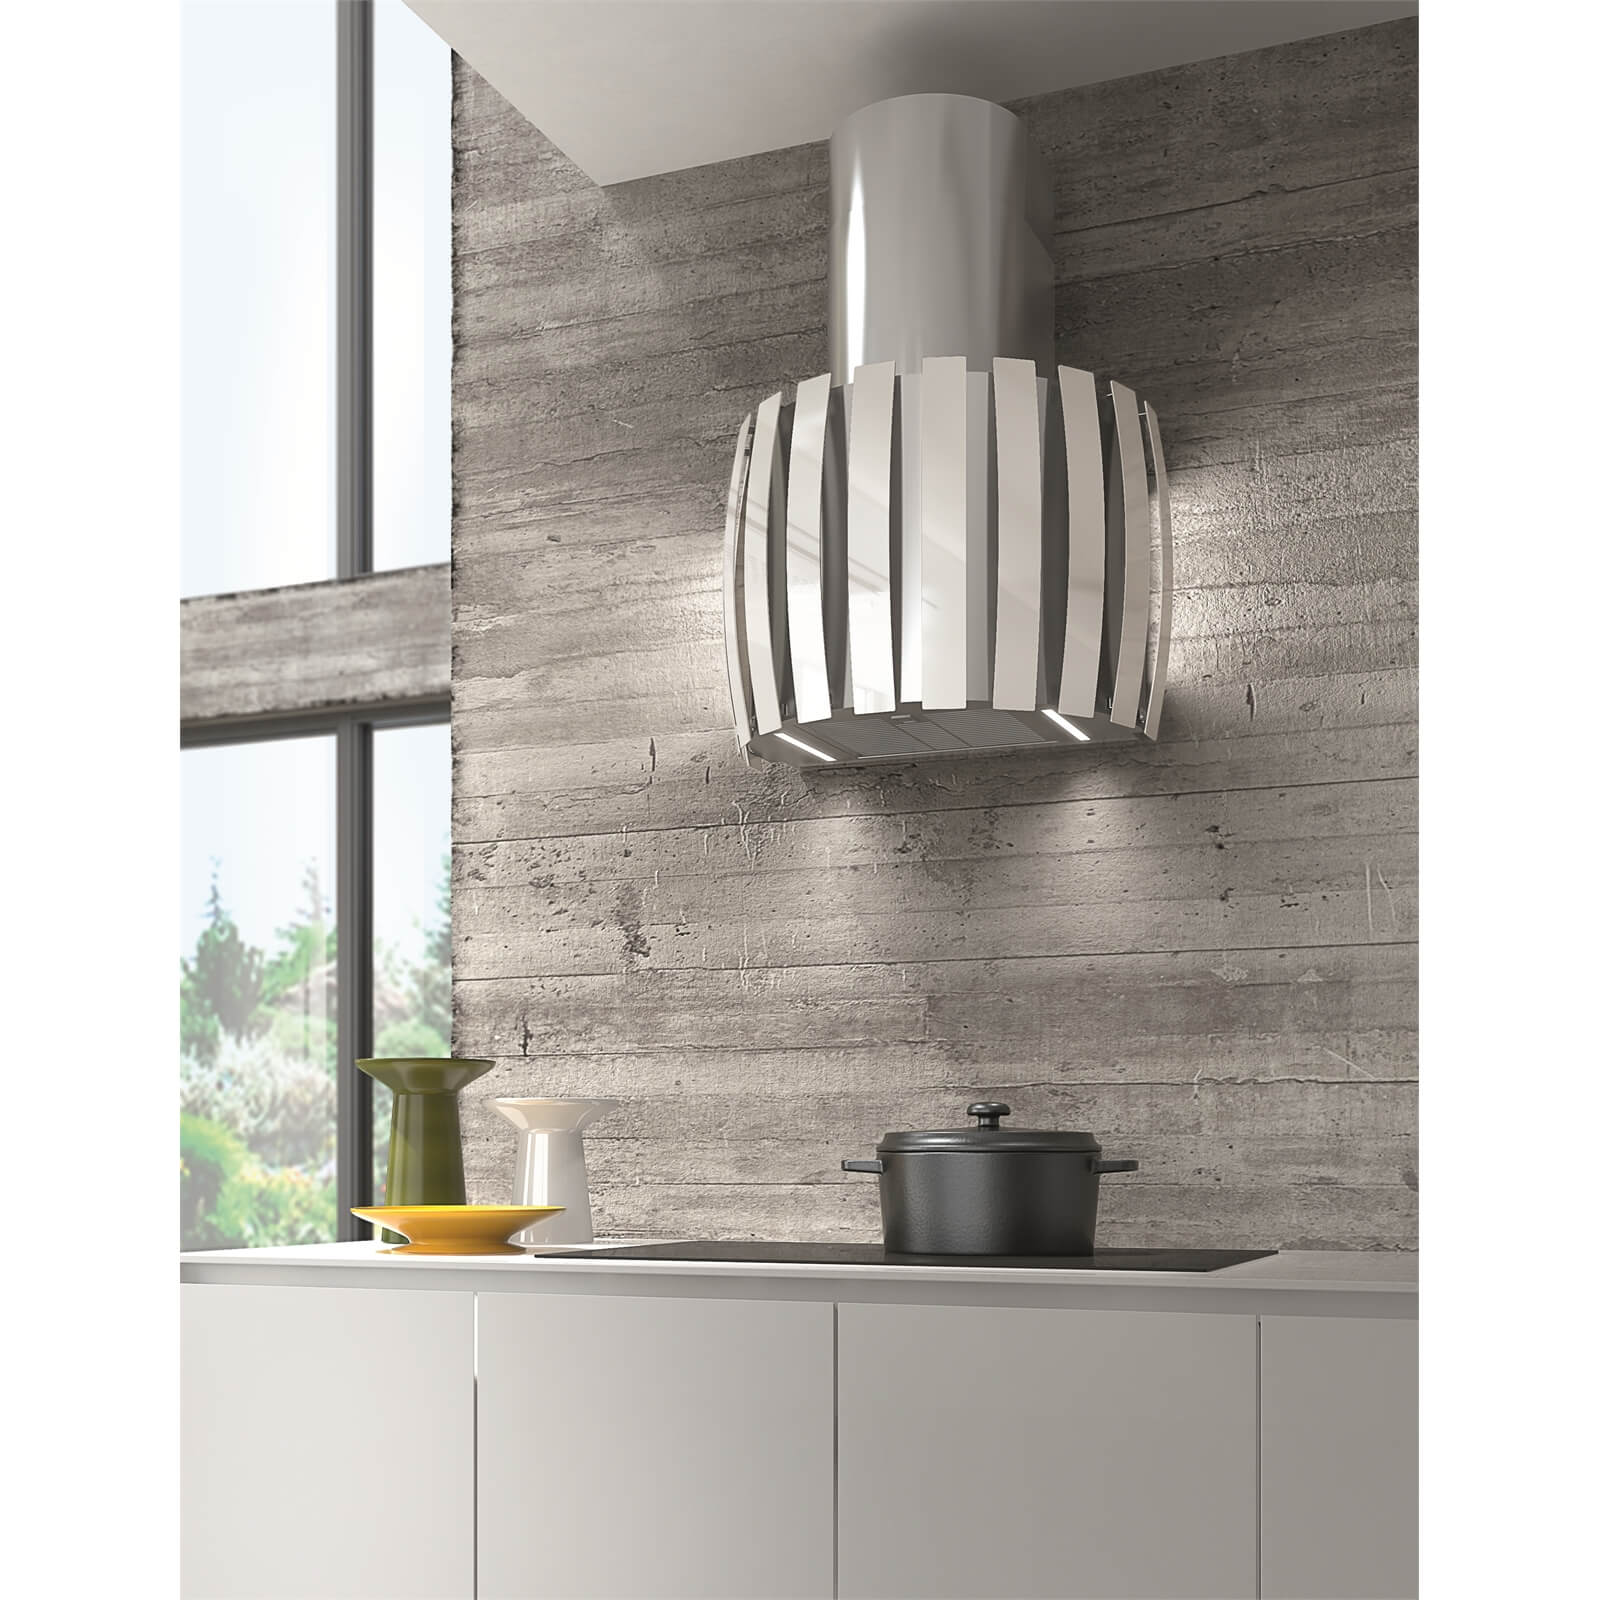 Inox Kudos Wall Mounted Extractor Stainless Steel - White